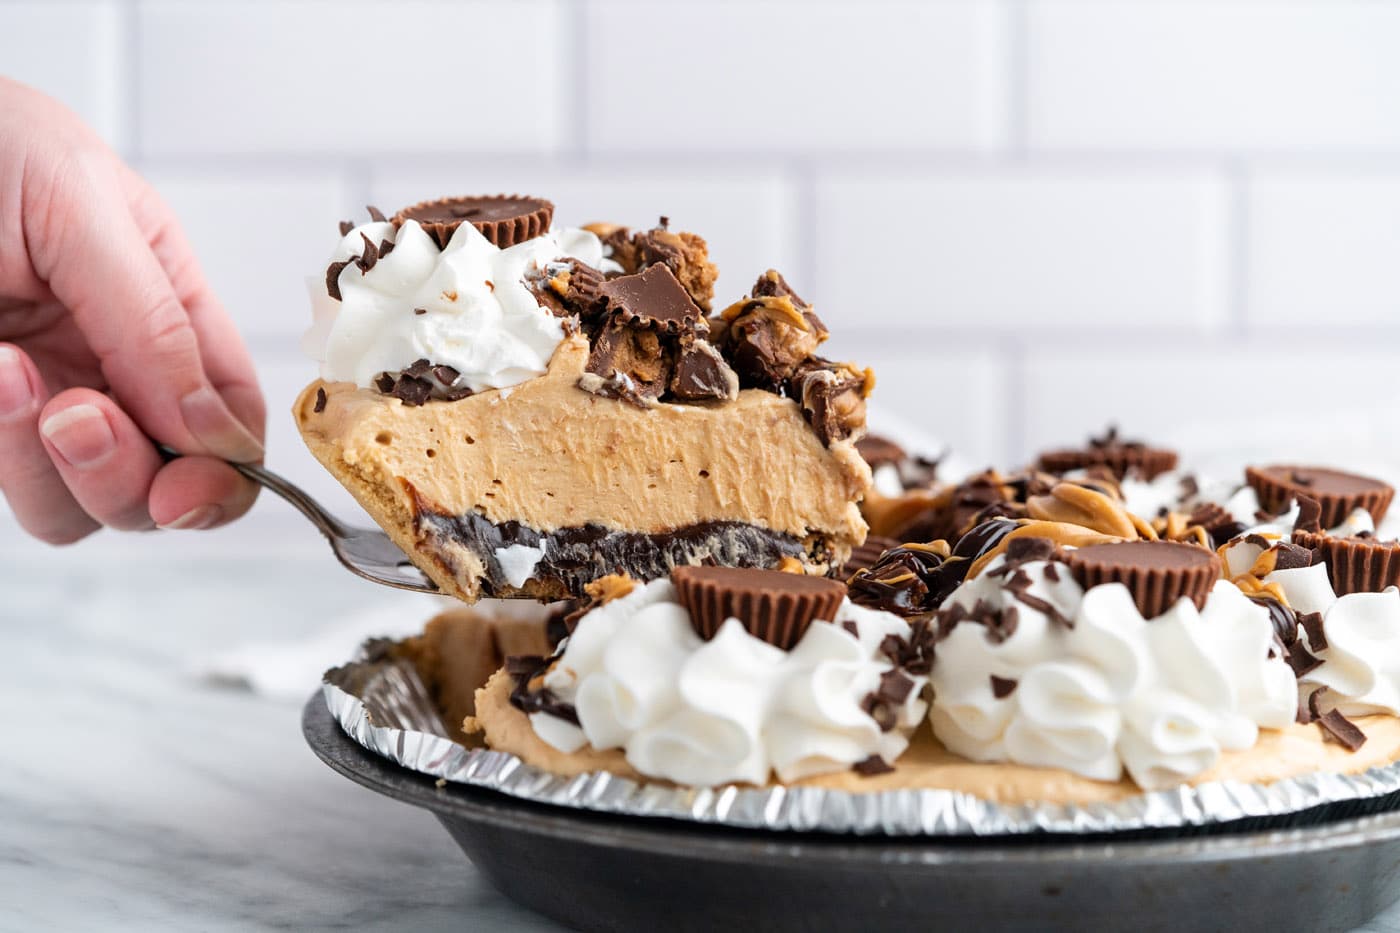 This Reeses pie is piled high with whipped cream, Reese's peanut butter cups, shaved chocolate, melt